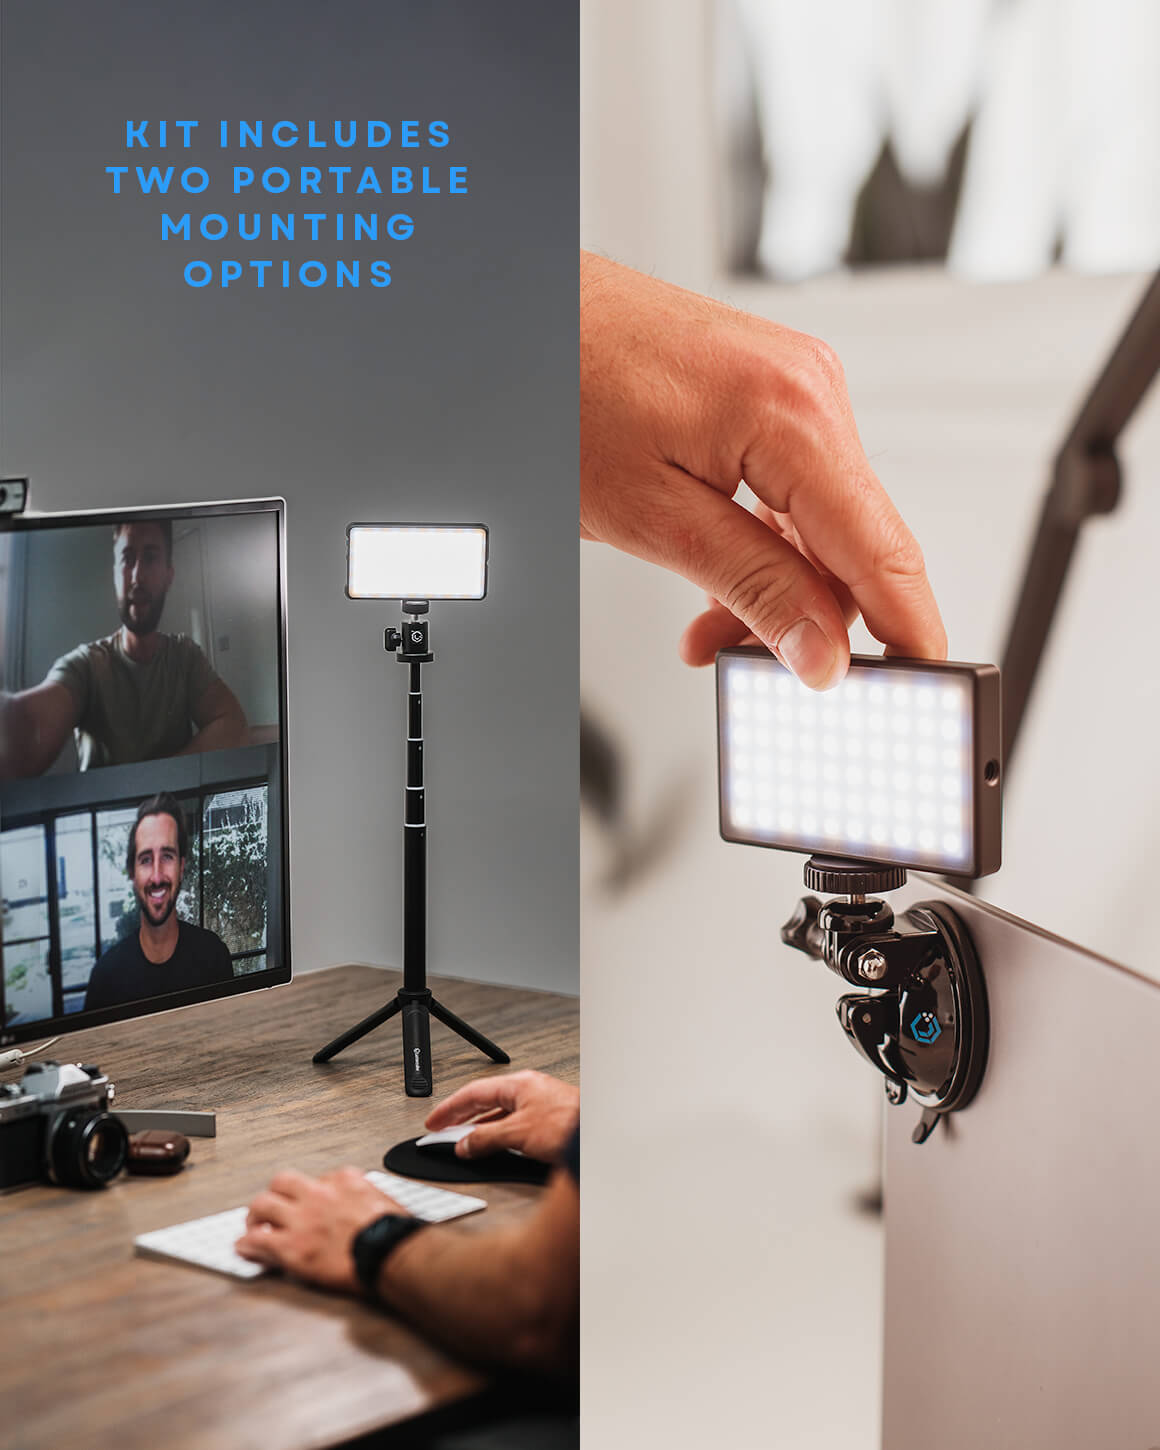 Two images showing both mounting options included in the Broadcast Lighting Kit: the stand and the suction mount for computer or tablet.